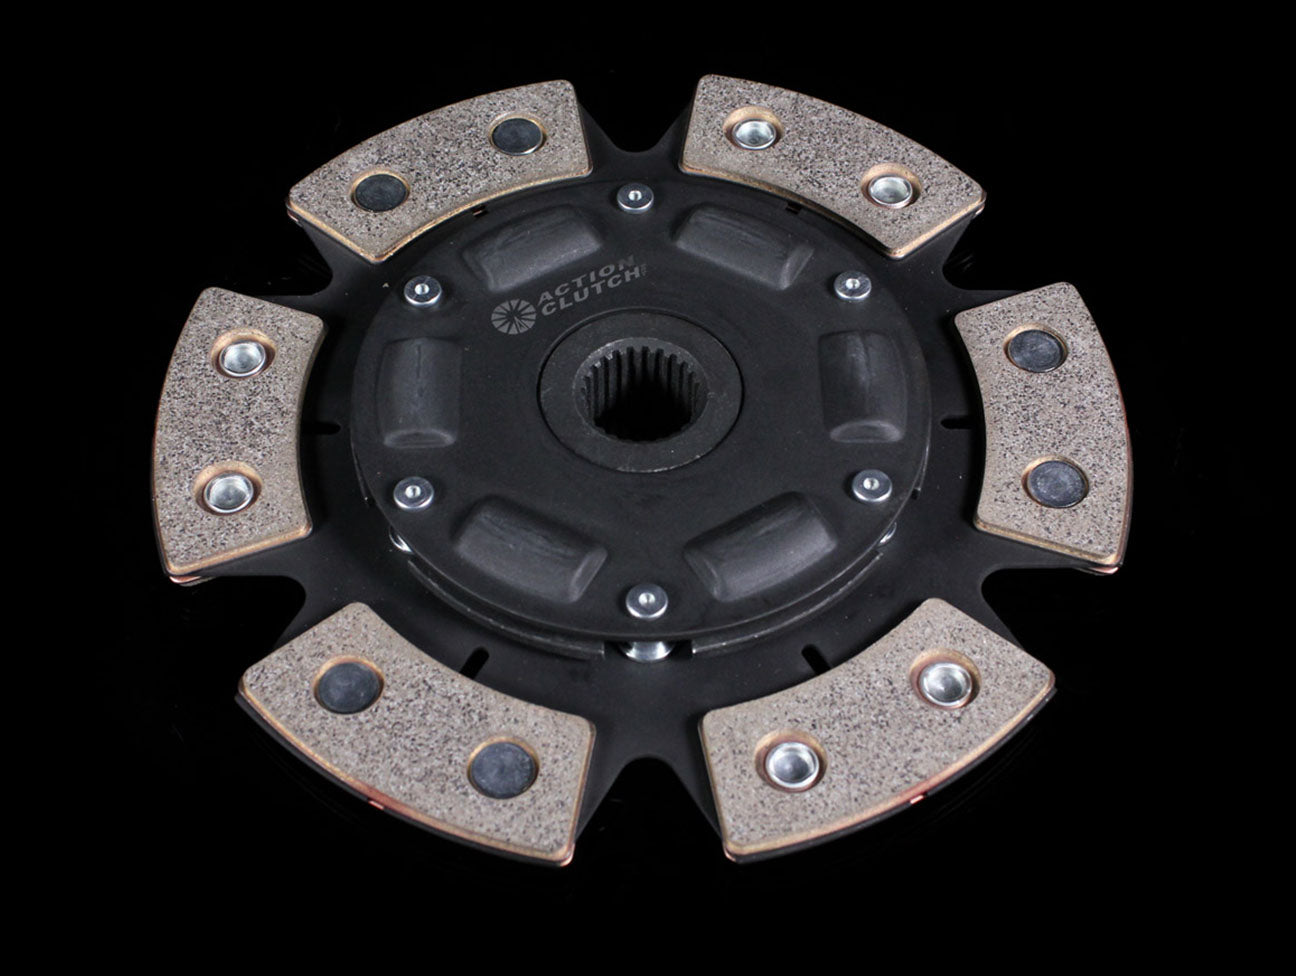 Action Clutch Stage 3 1MS Clutch Kit - B-Series